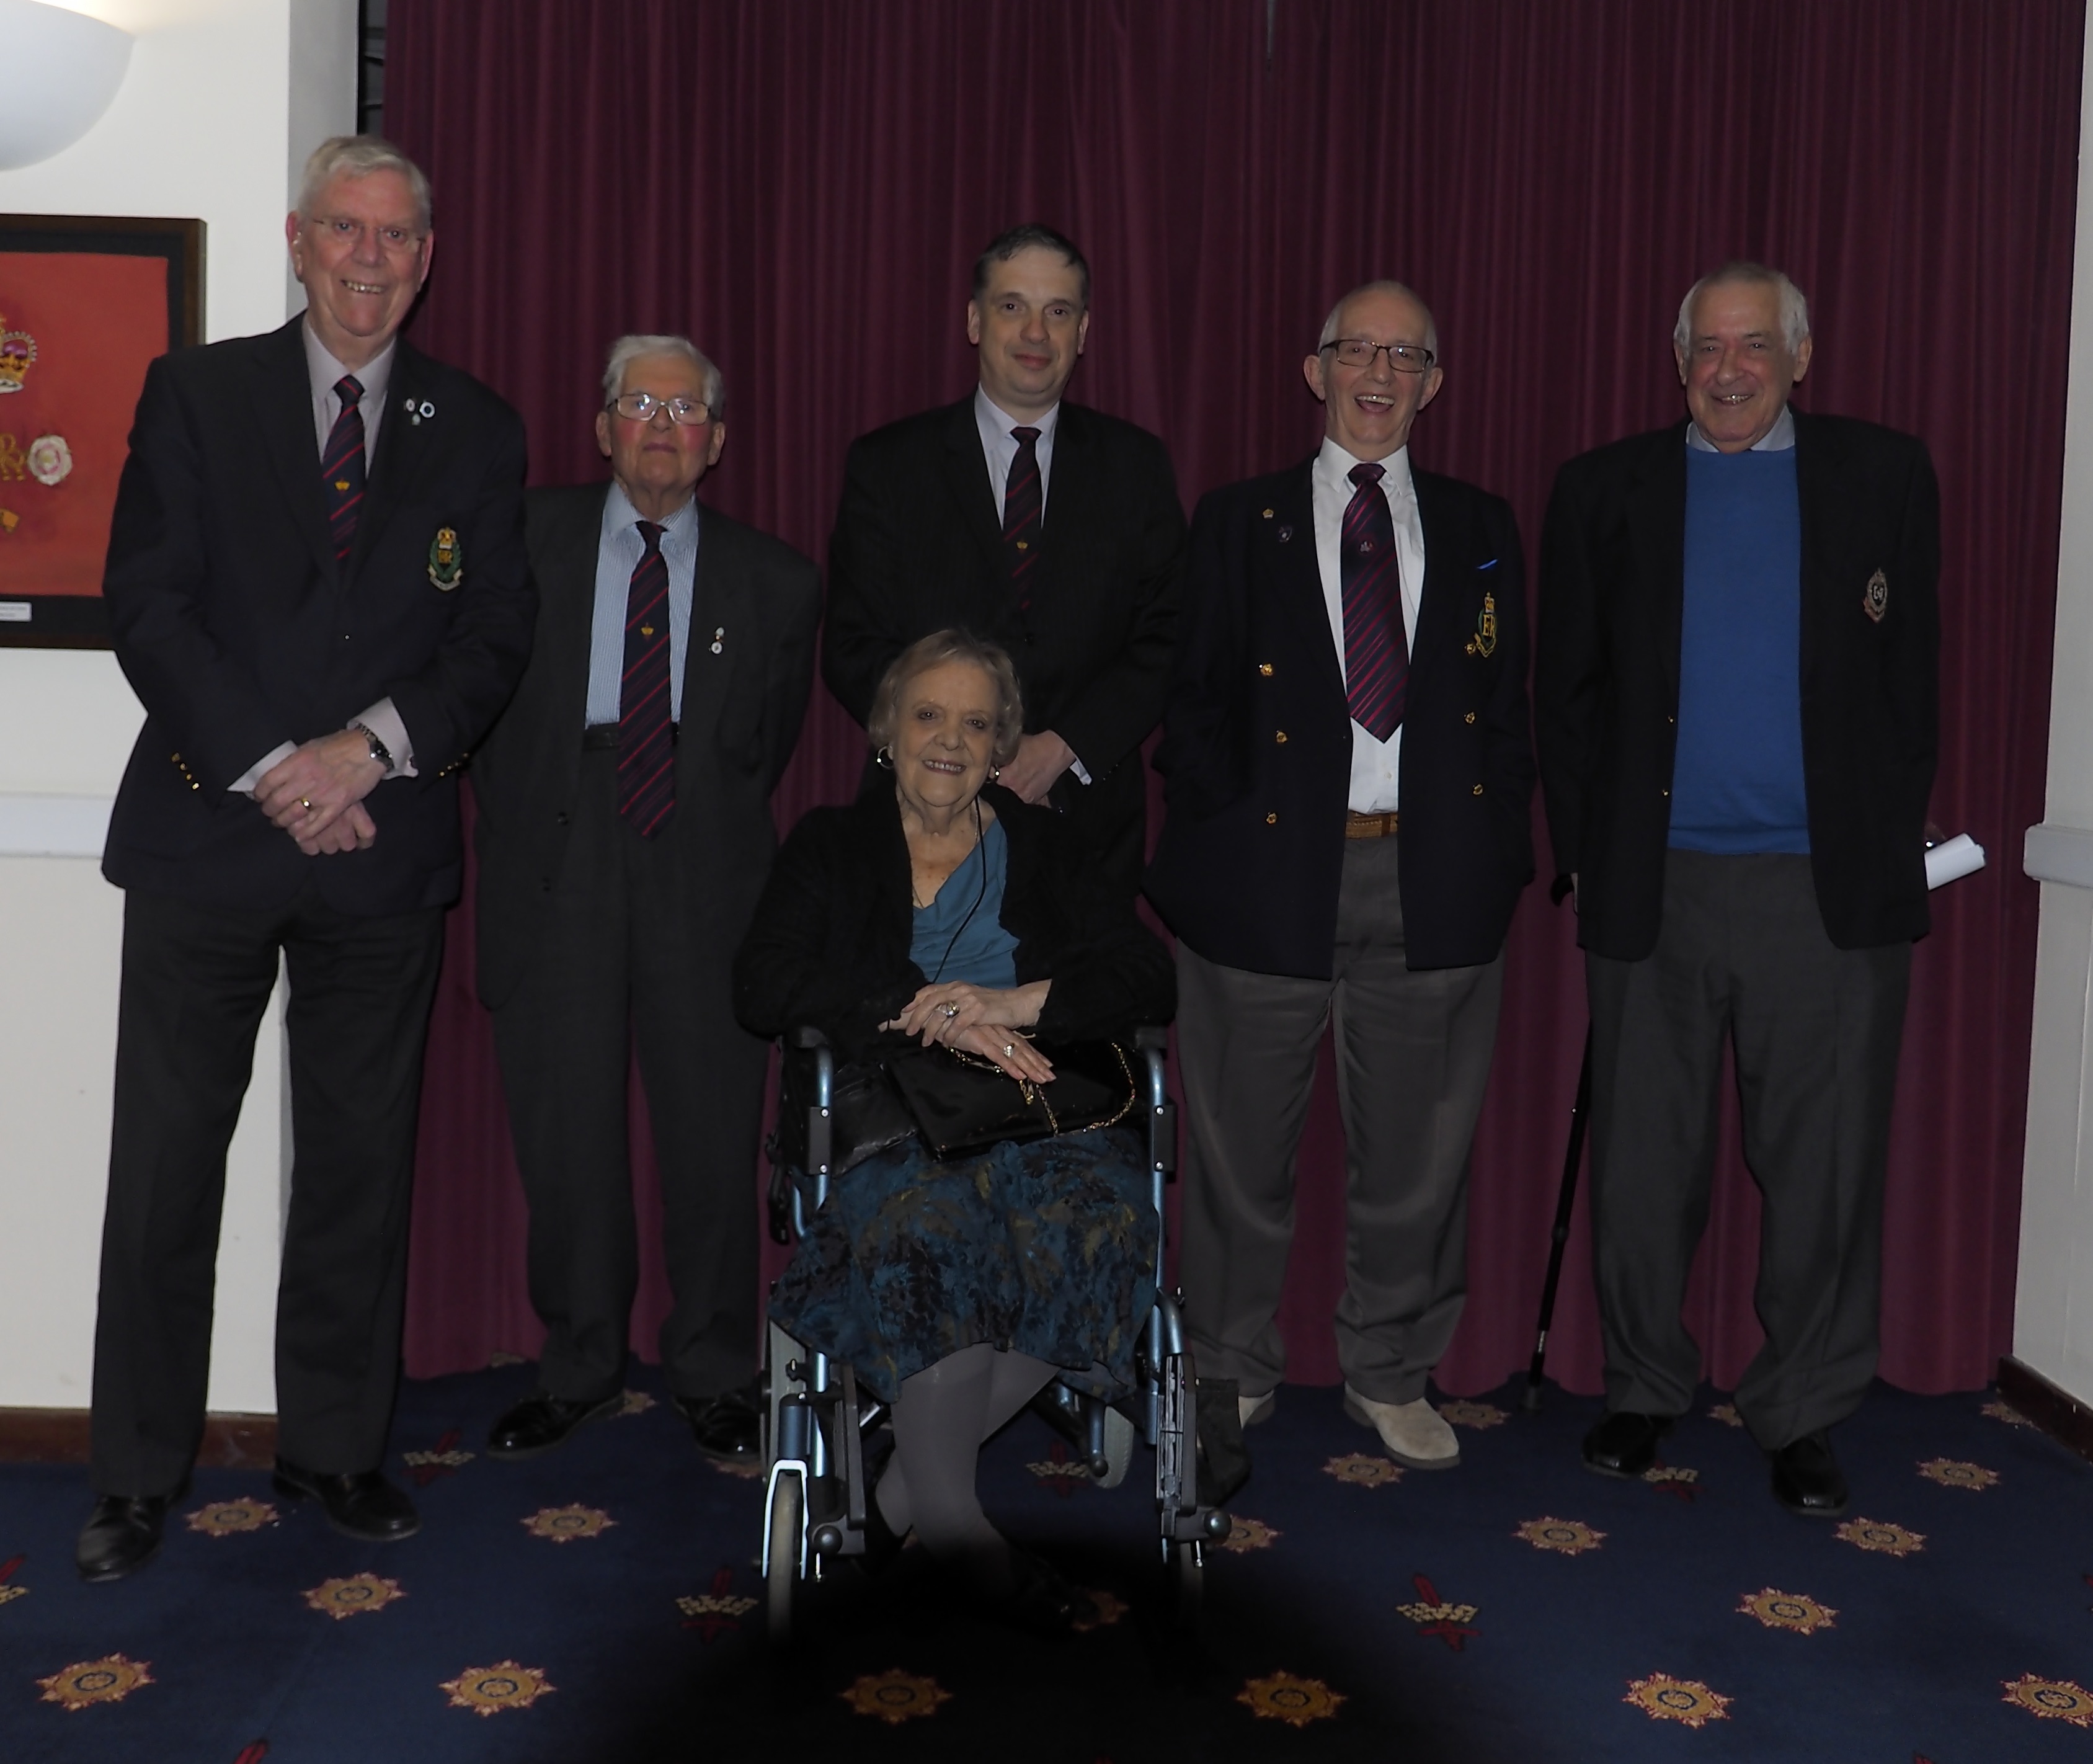 The elected committee from 2016